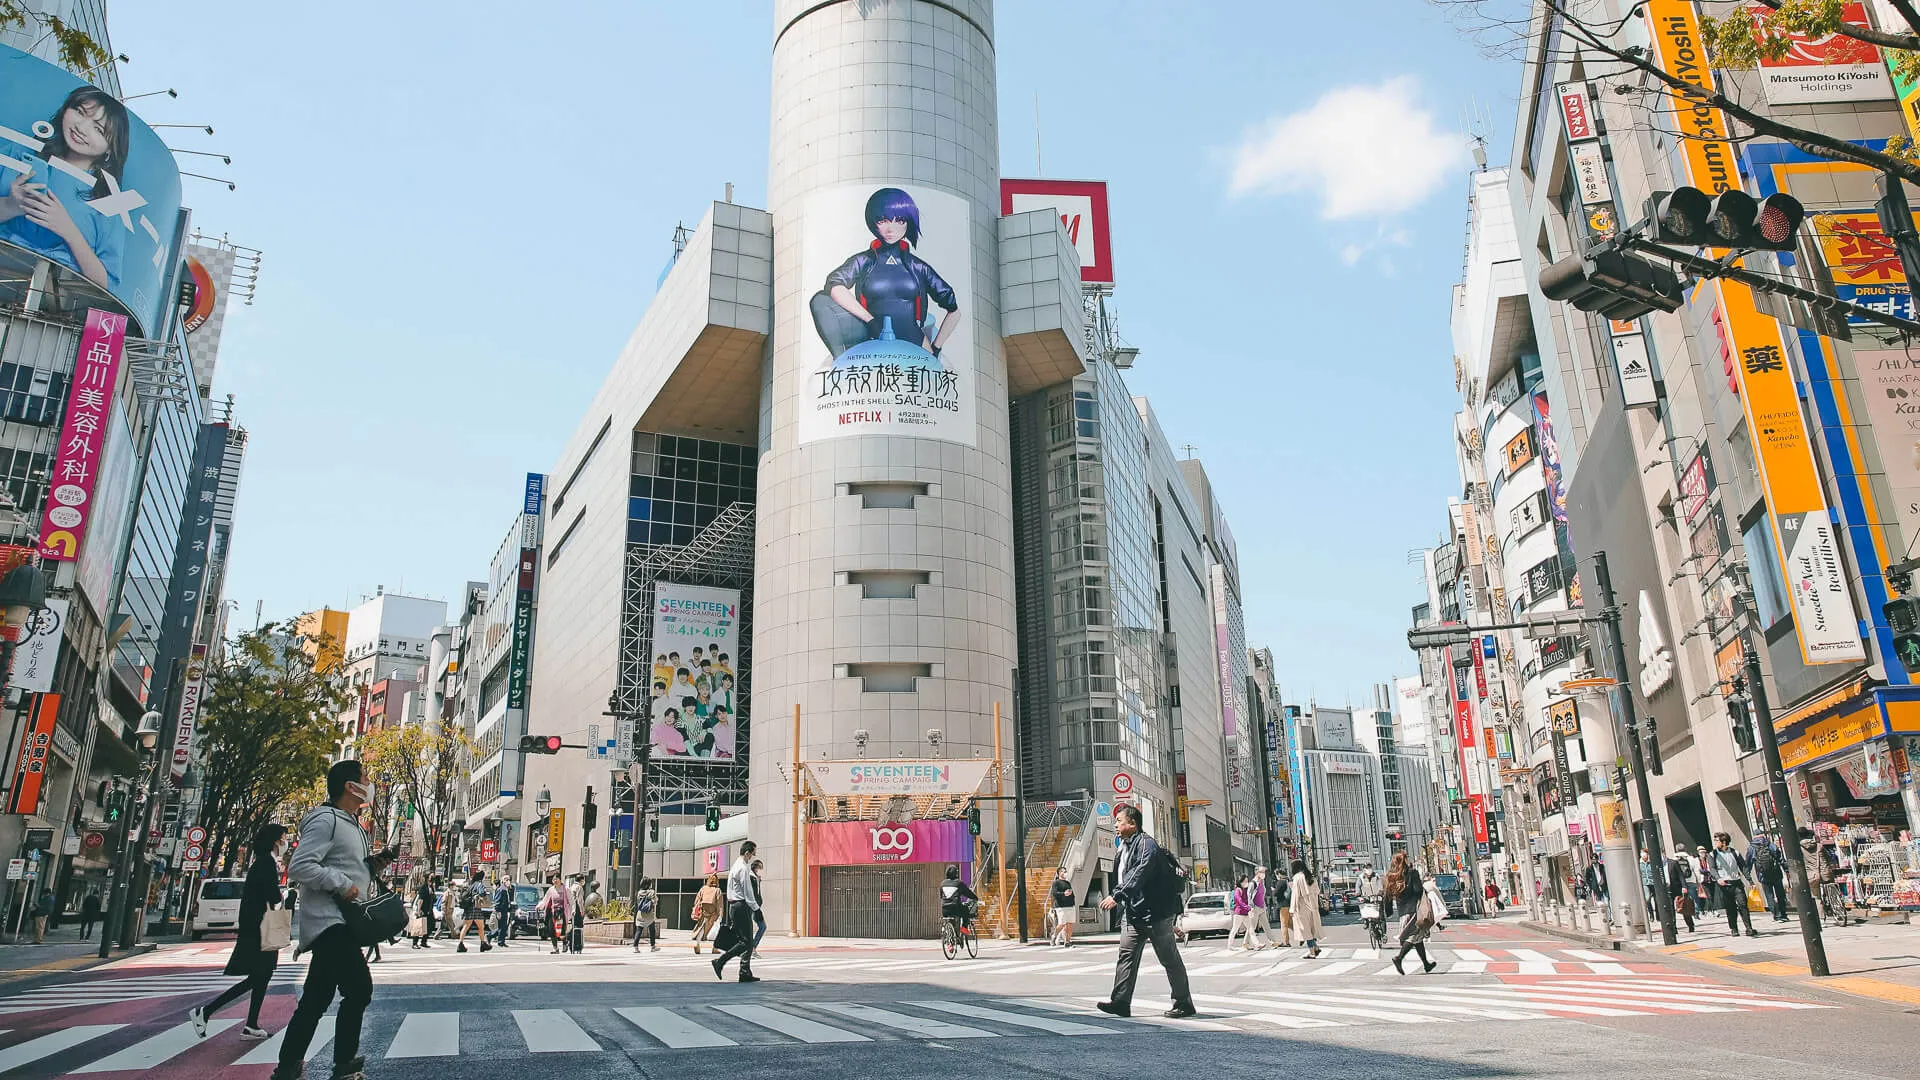 Mandatory Credit: Photo by Aflo/Shutterstock (10612929bm)Shibuya's famous scramble crossing is quieter than usual in Tokyo, Japan, amid the state of emergency due to the spread of the novel coronavirus.